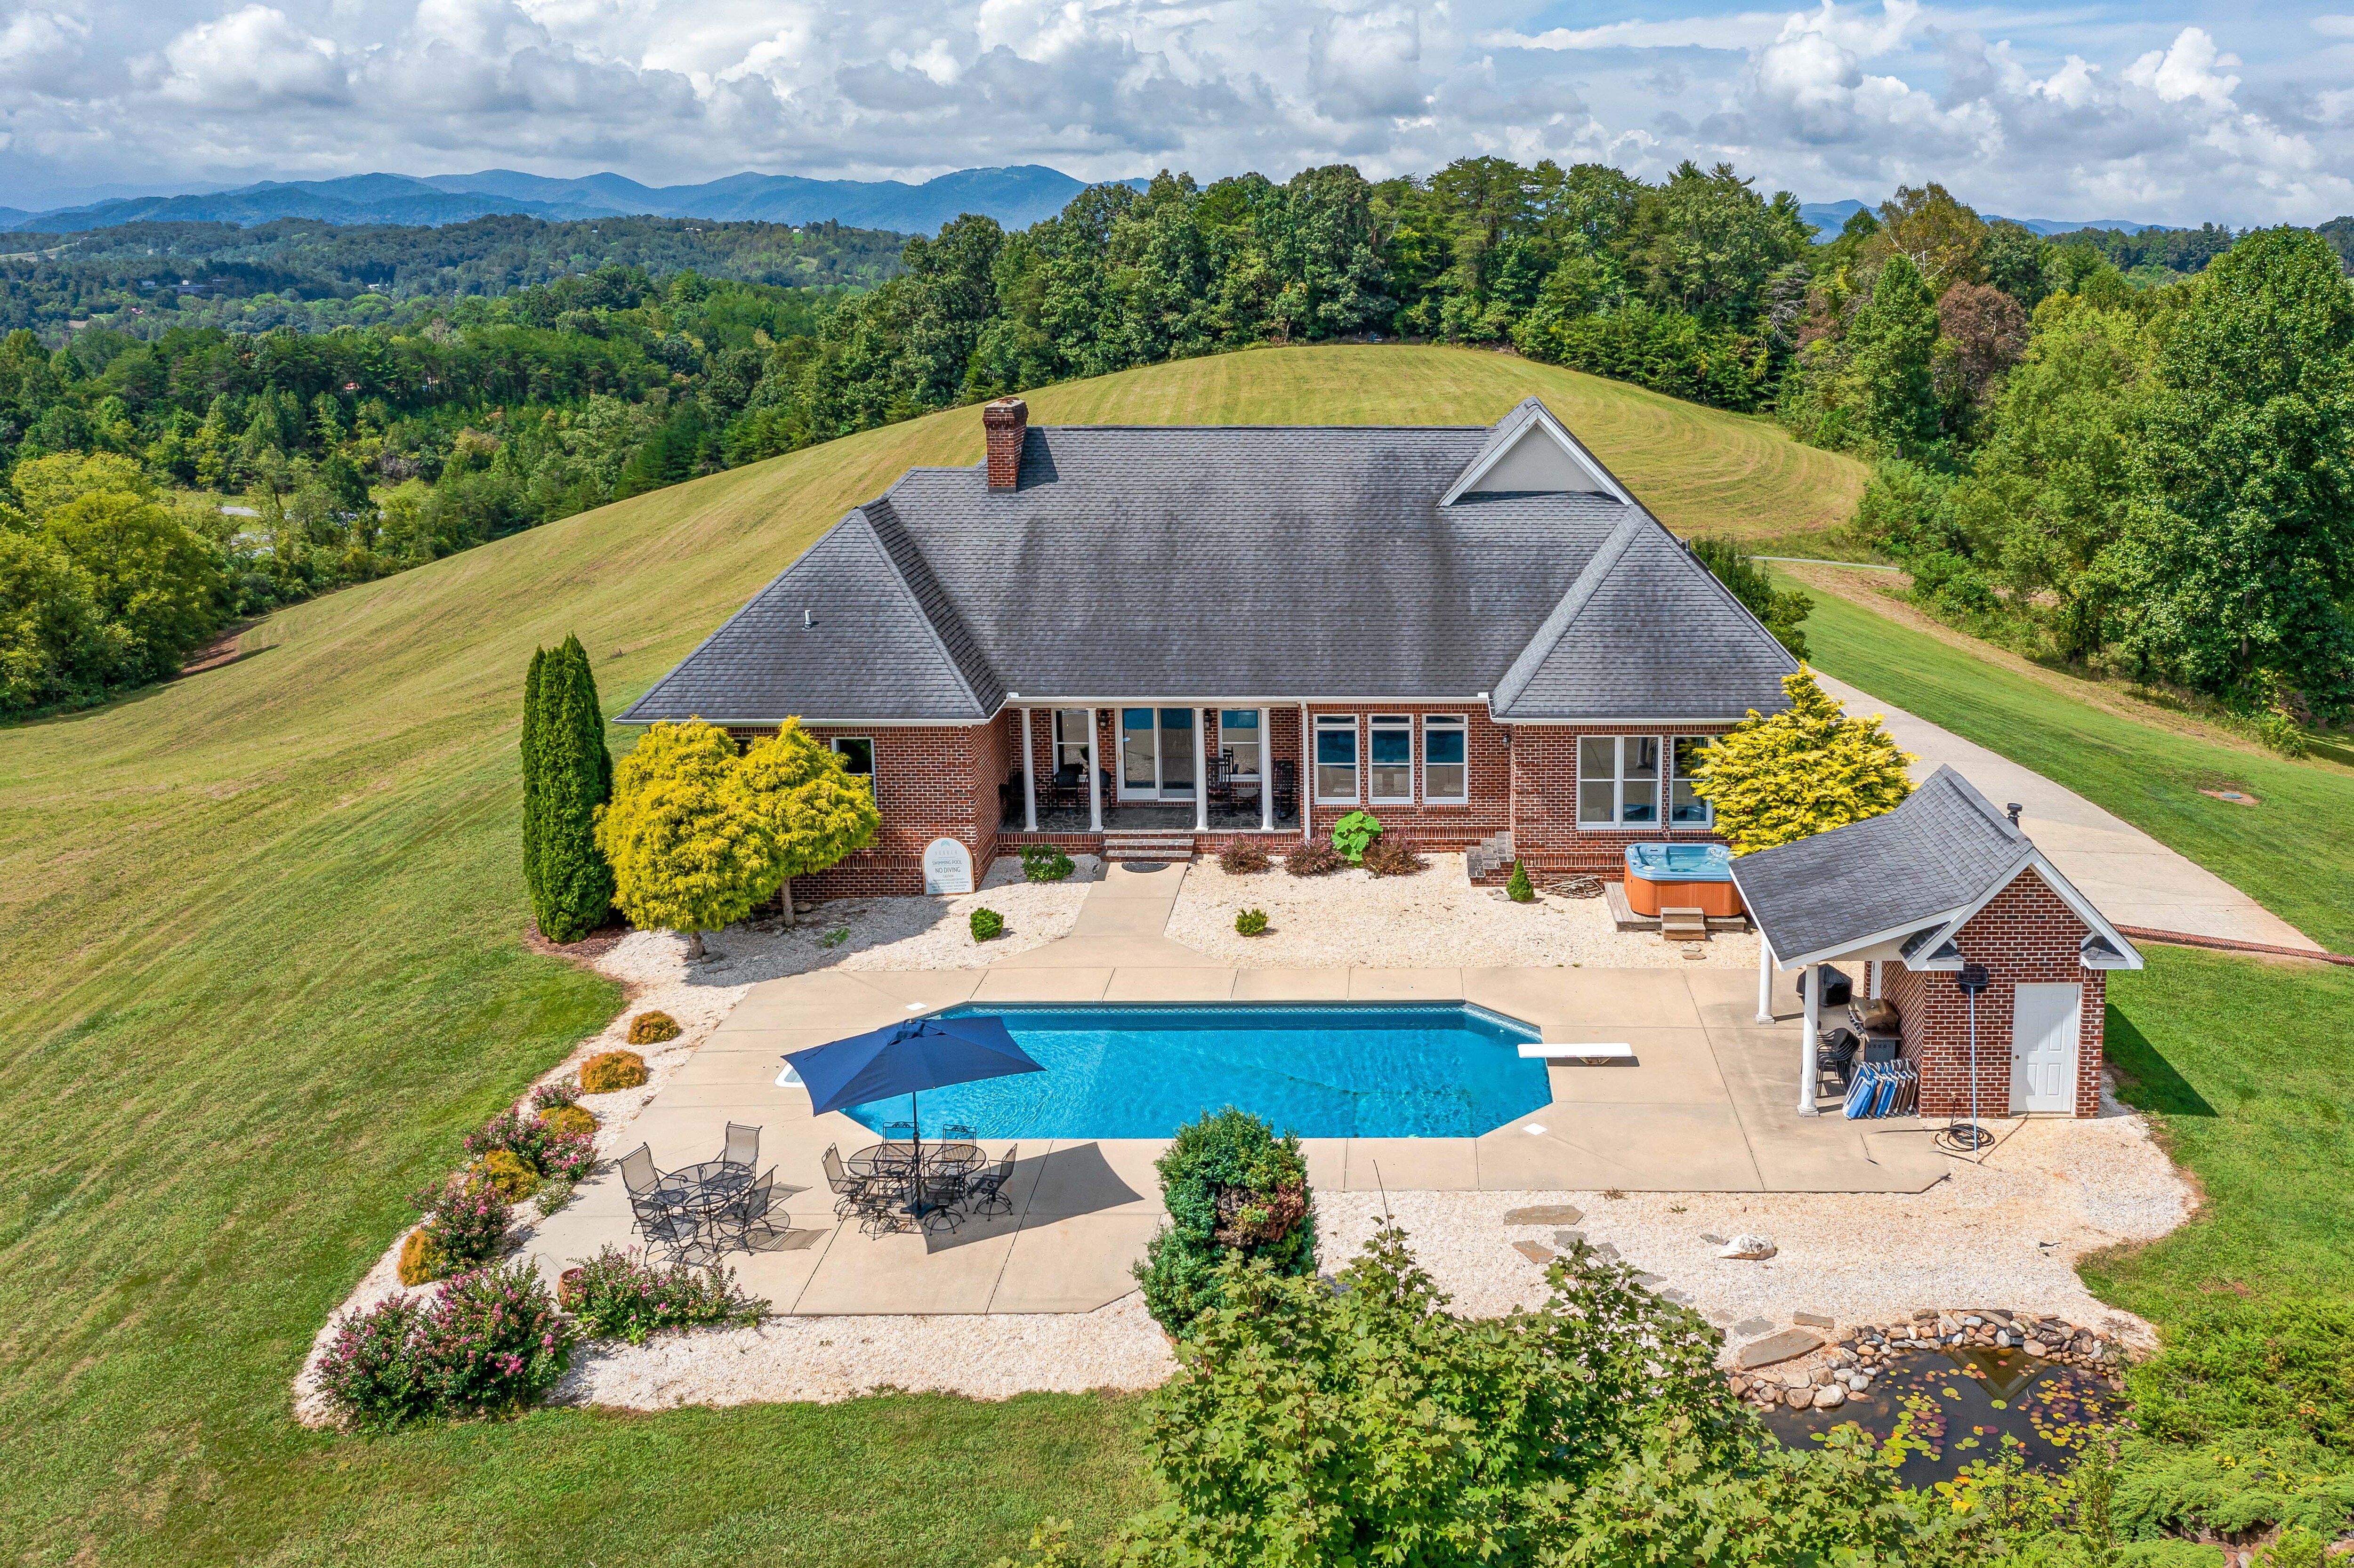 Get ready to be “wowed” by this 4,500+ sq. ft. spectacular modern, brick, Colonial-style retreat estate with soaring vistas.